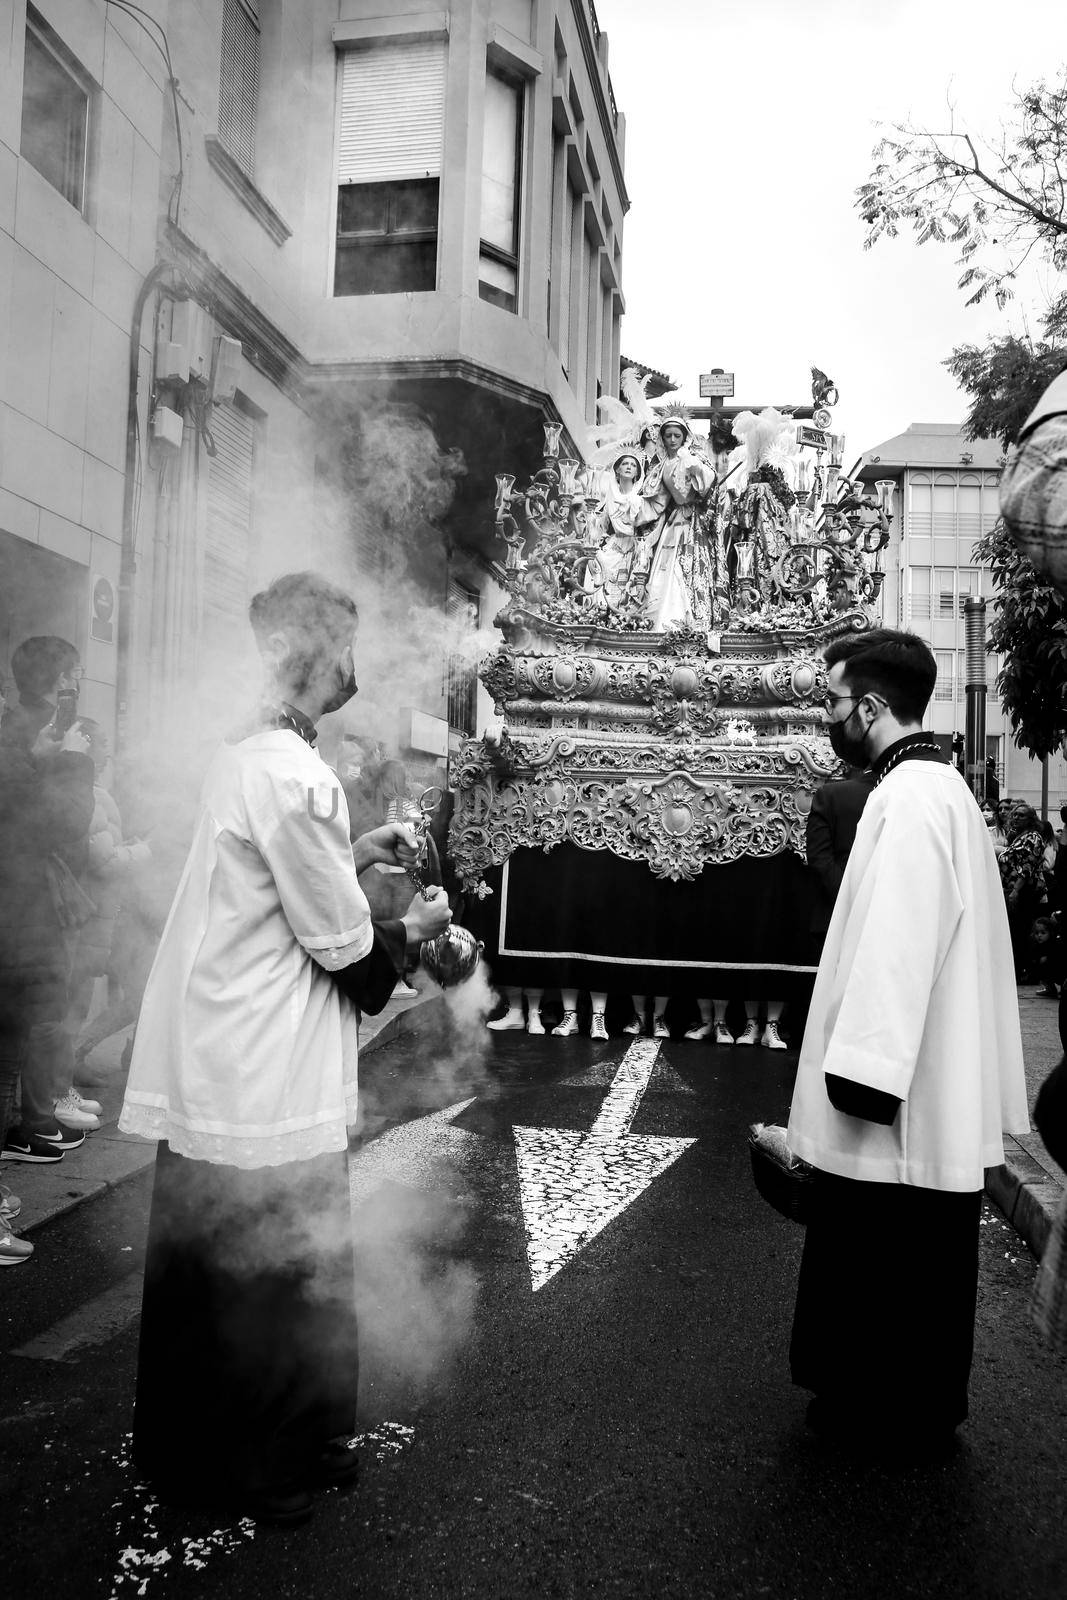 Elche, Spain- April 13, 2022: Easter Parade with altar boys and penitents through the streets of Elche city in the Holy Week